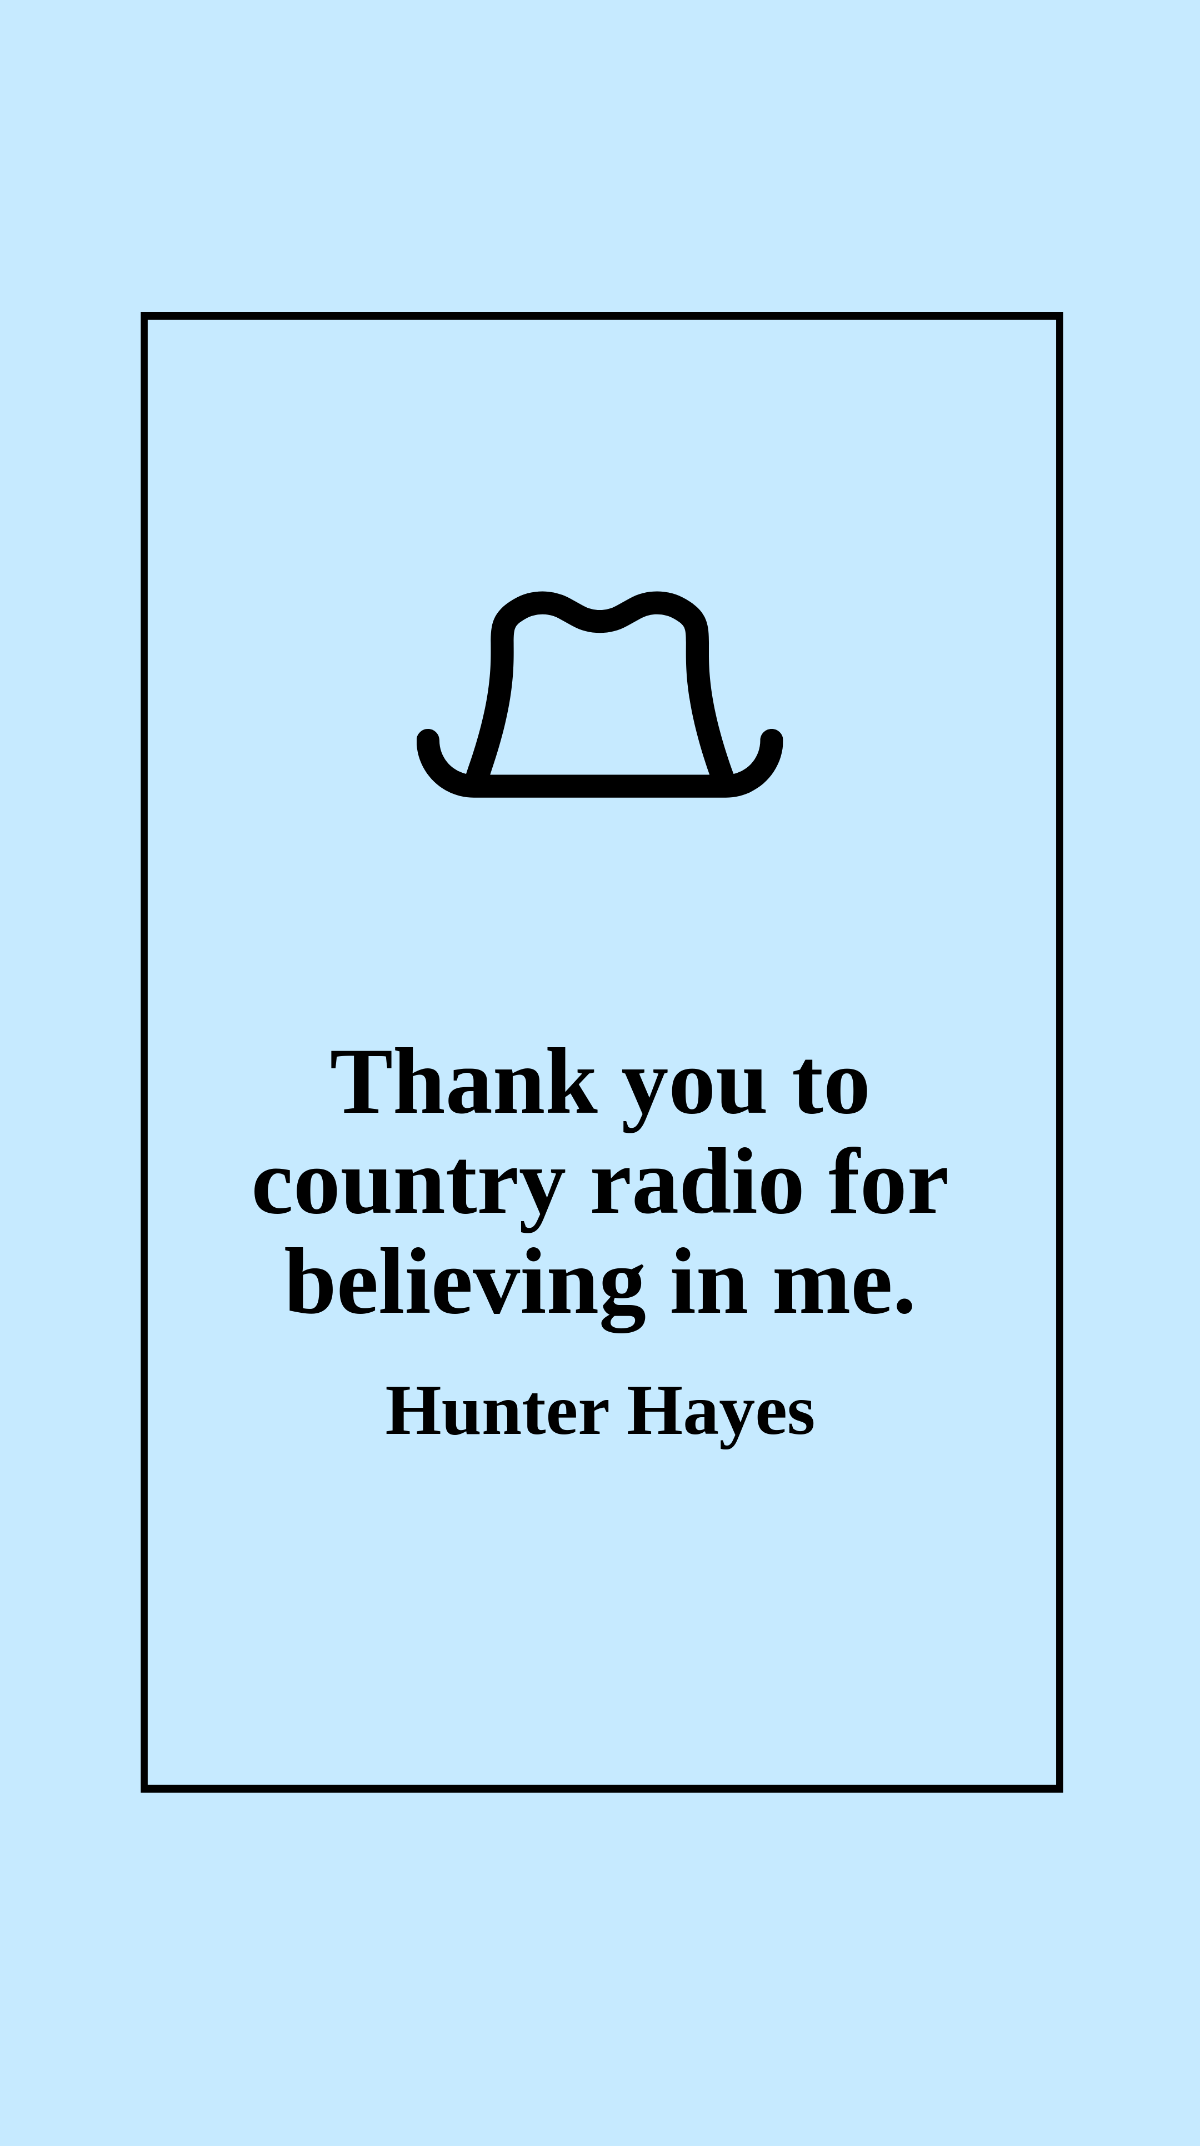 Hunter Hayes - Thank you to country radio for believing in me. Template